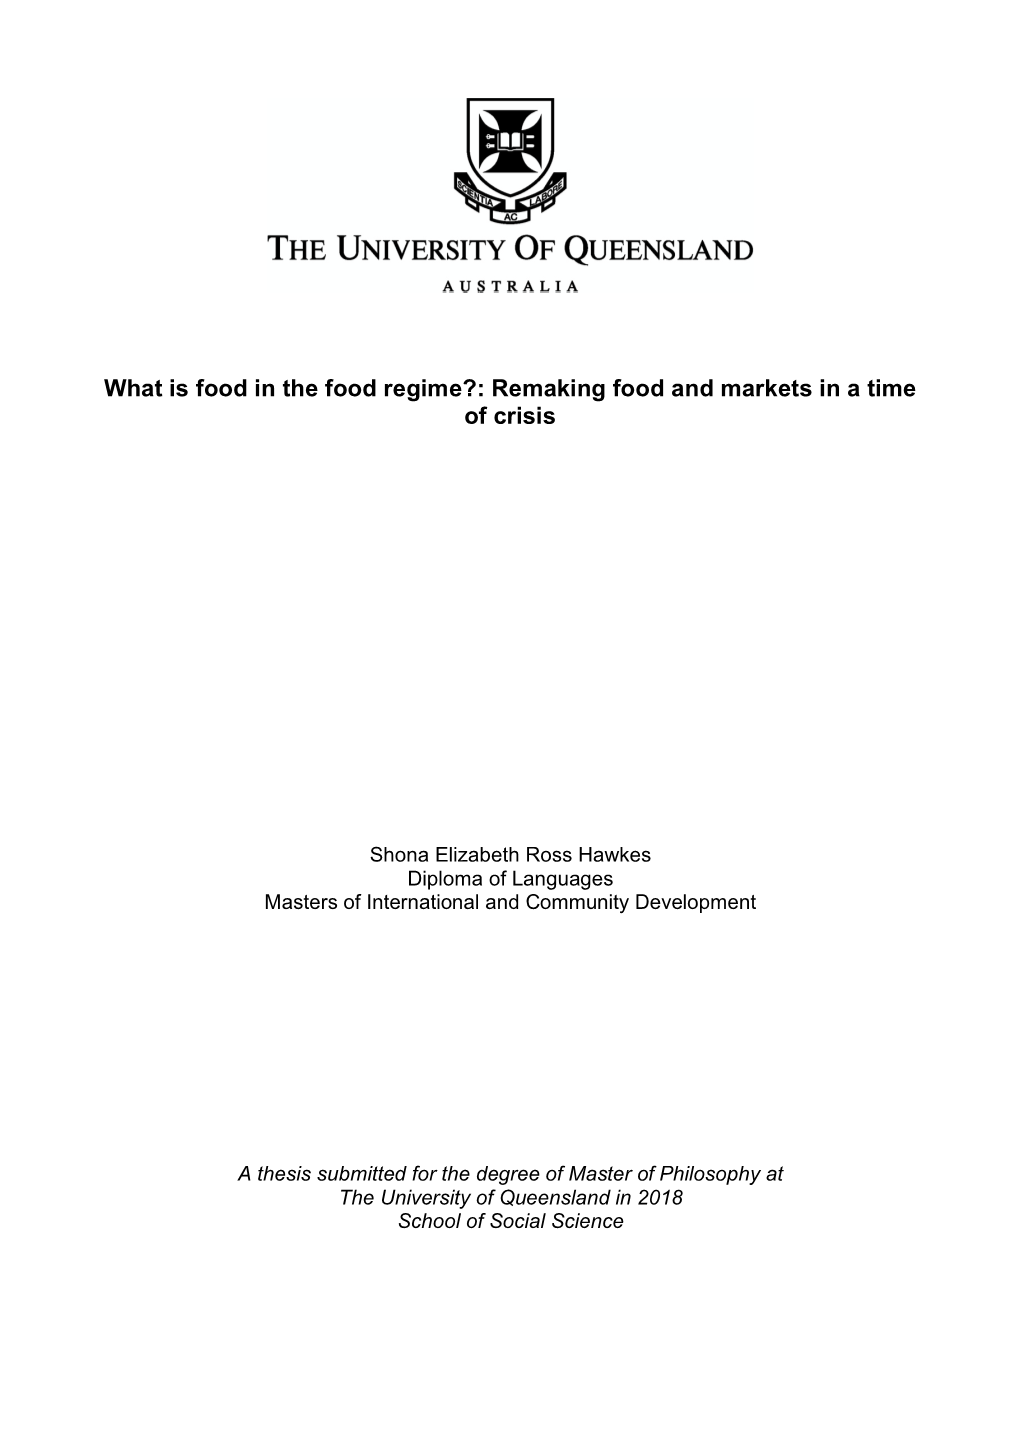 What Is Food in the Food Regime?: Remaking Food and Markets in a Time of Crisis